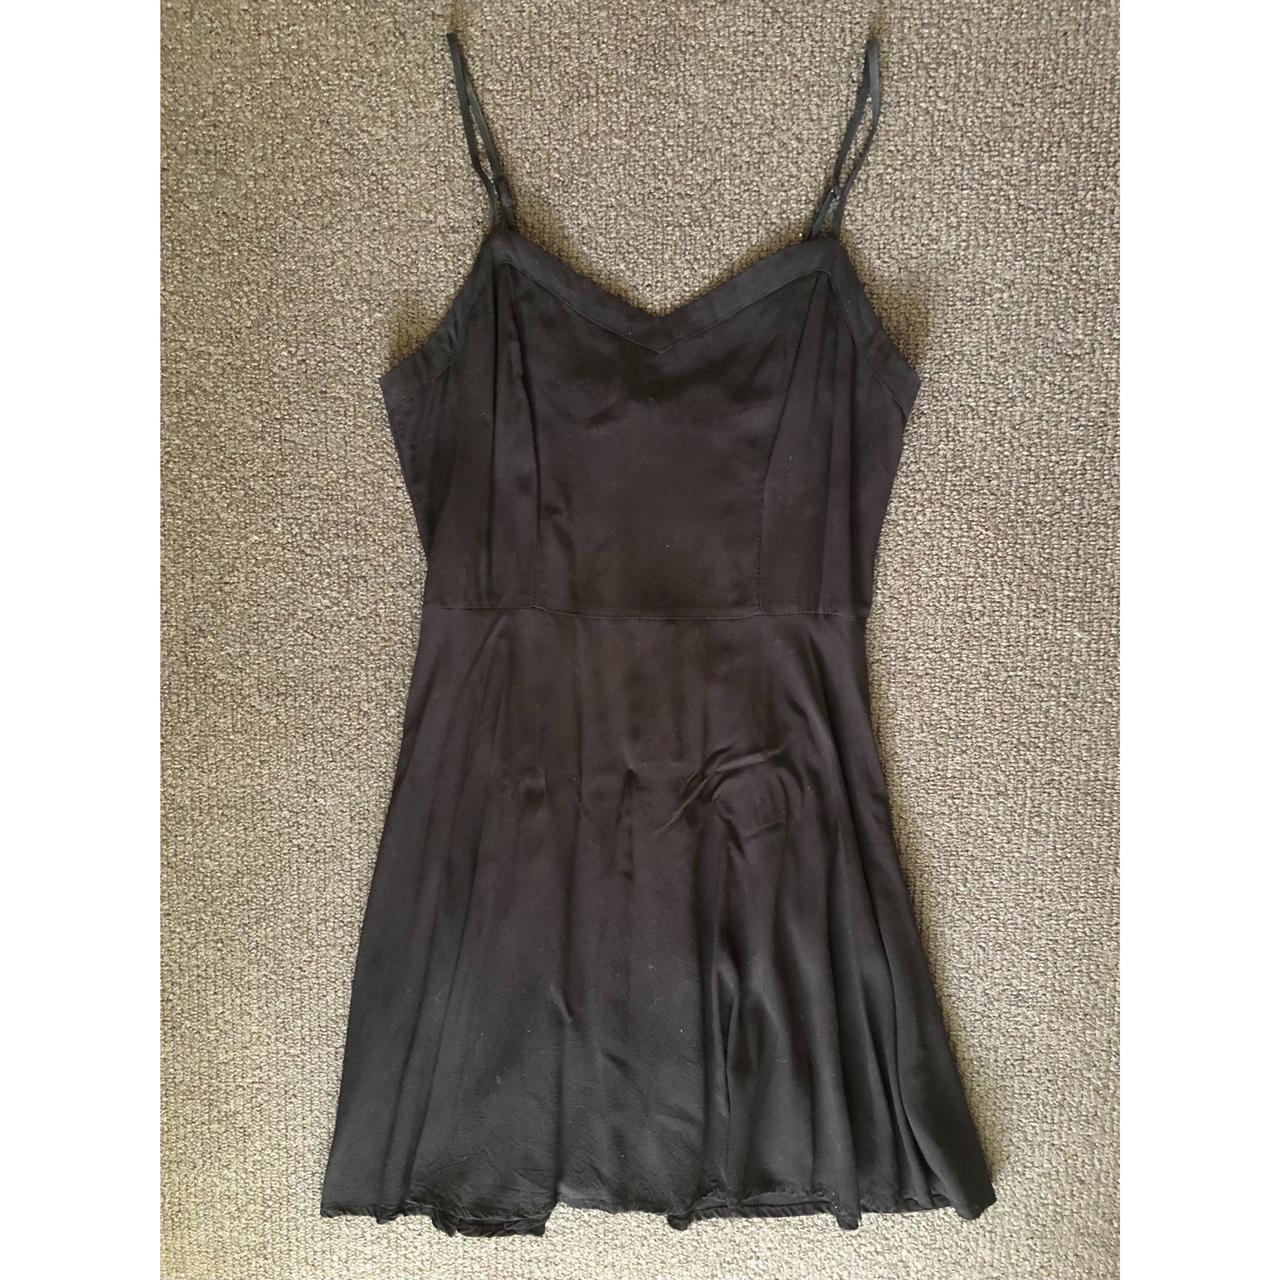 Cute black mini dress from Cotton On. Size XS with... - Depop